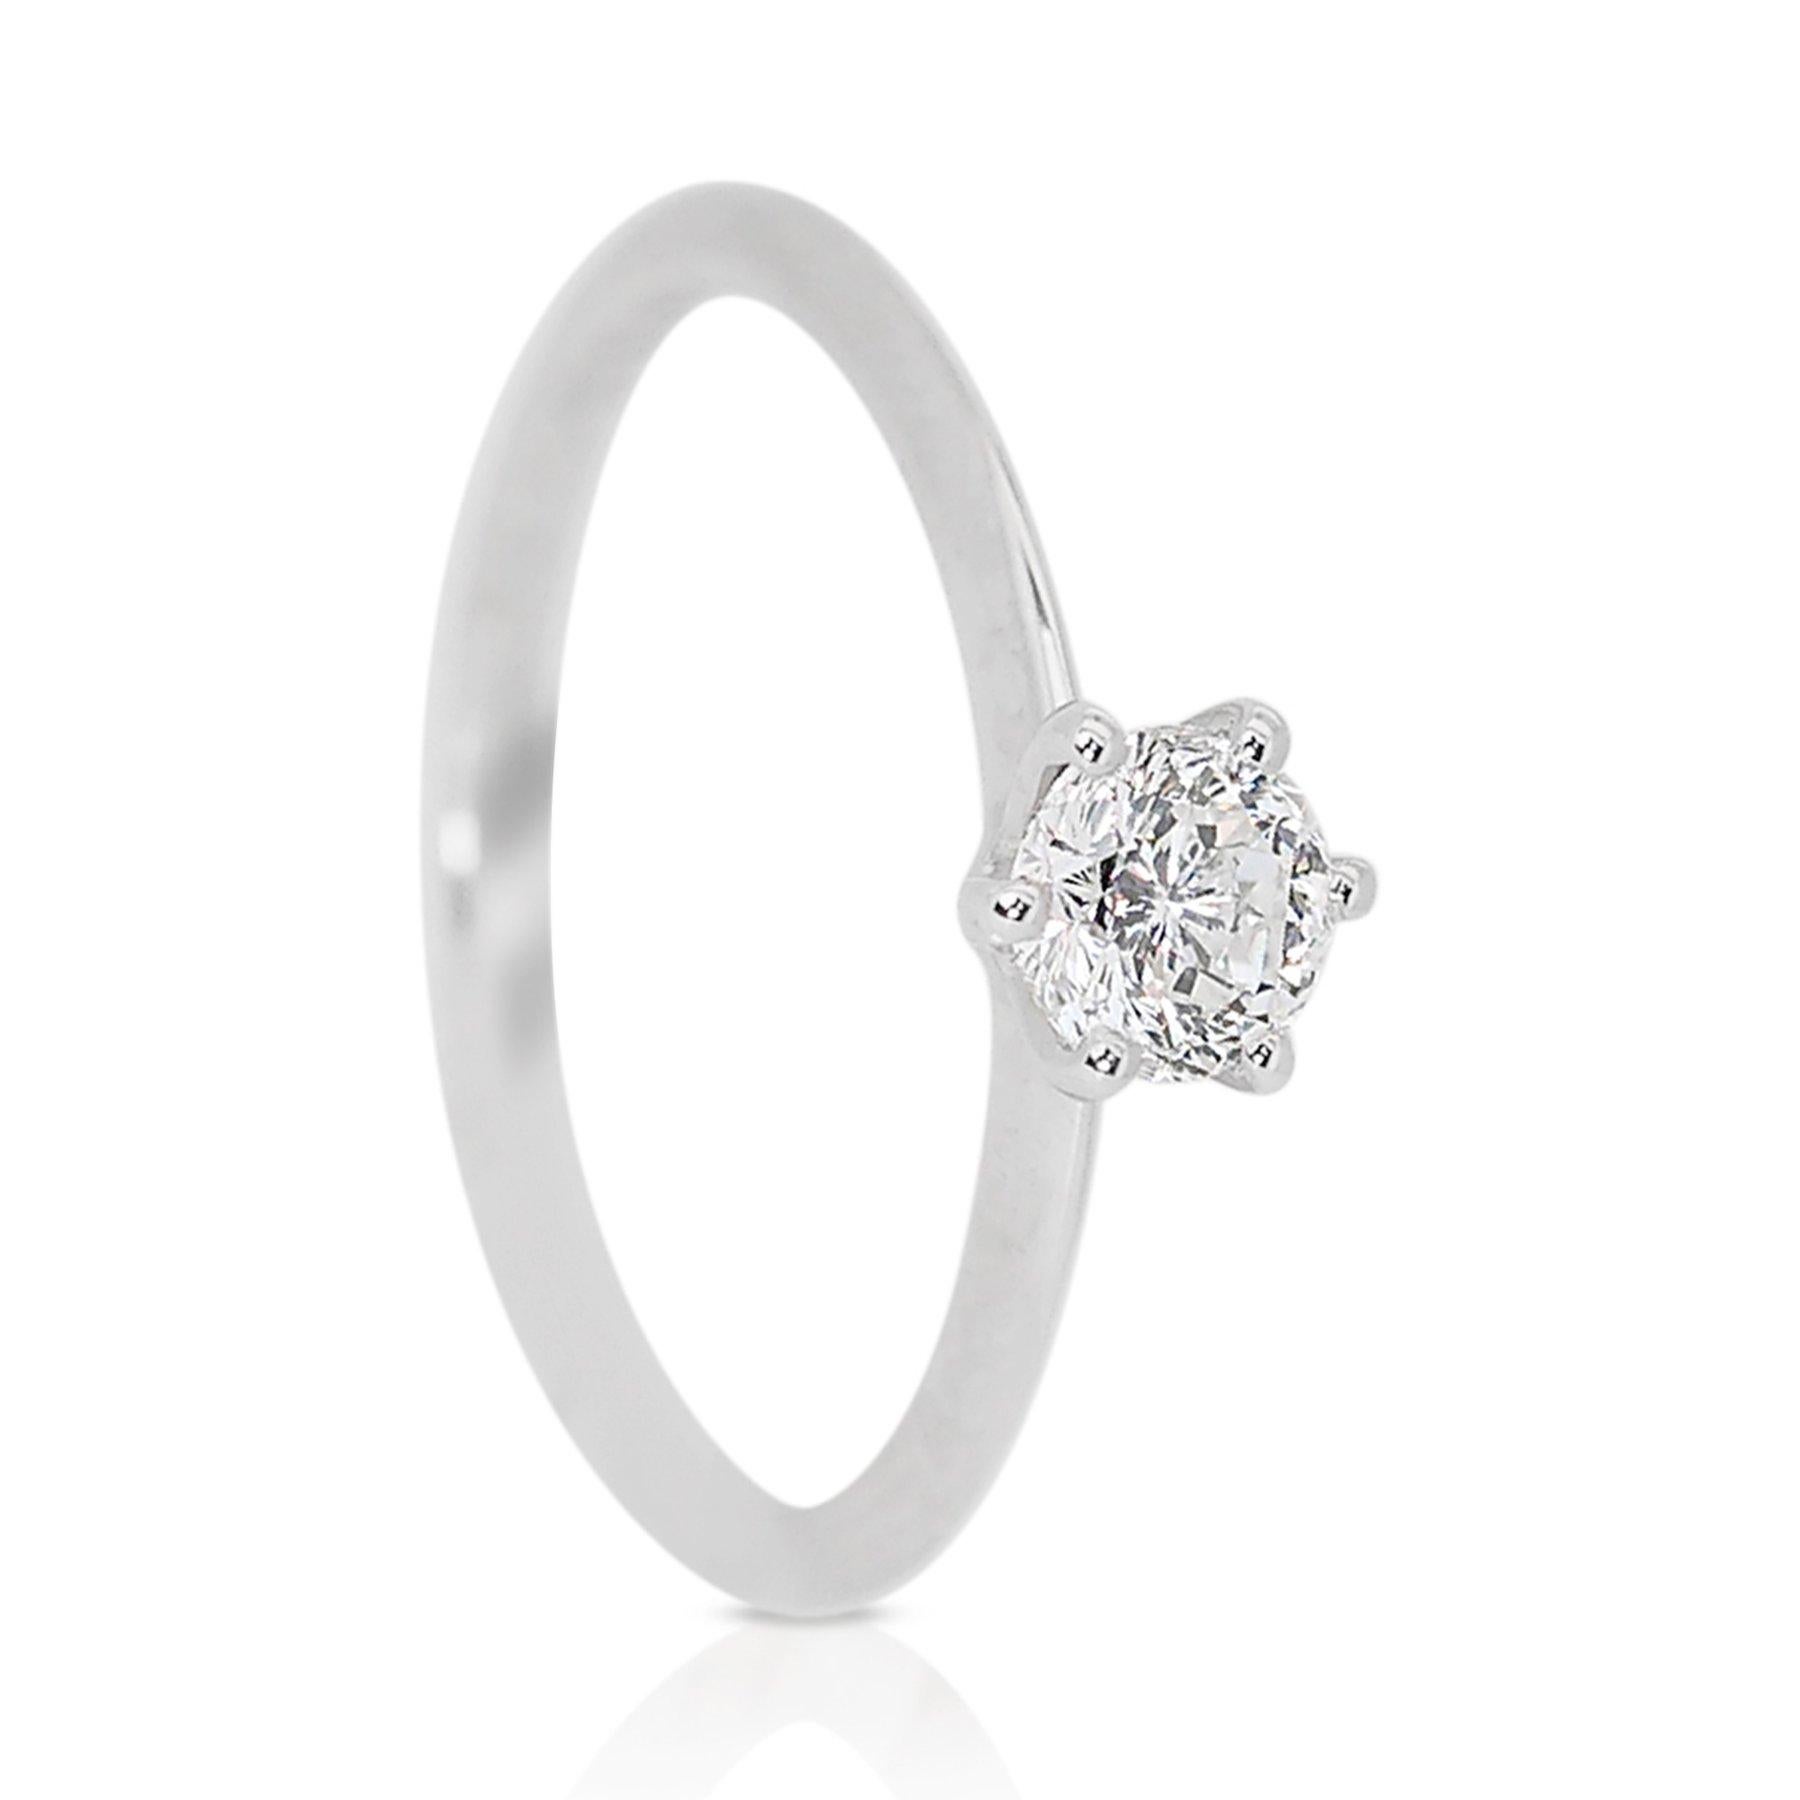 Round Cut Exquisite 0.70ct Round Diamond Solitaire Ring in 18k White Gold - GIA Certified For Sale